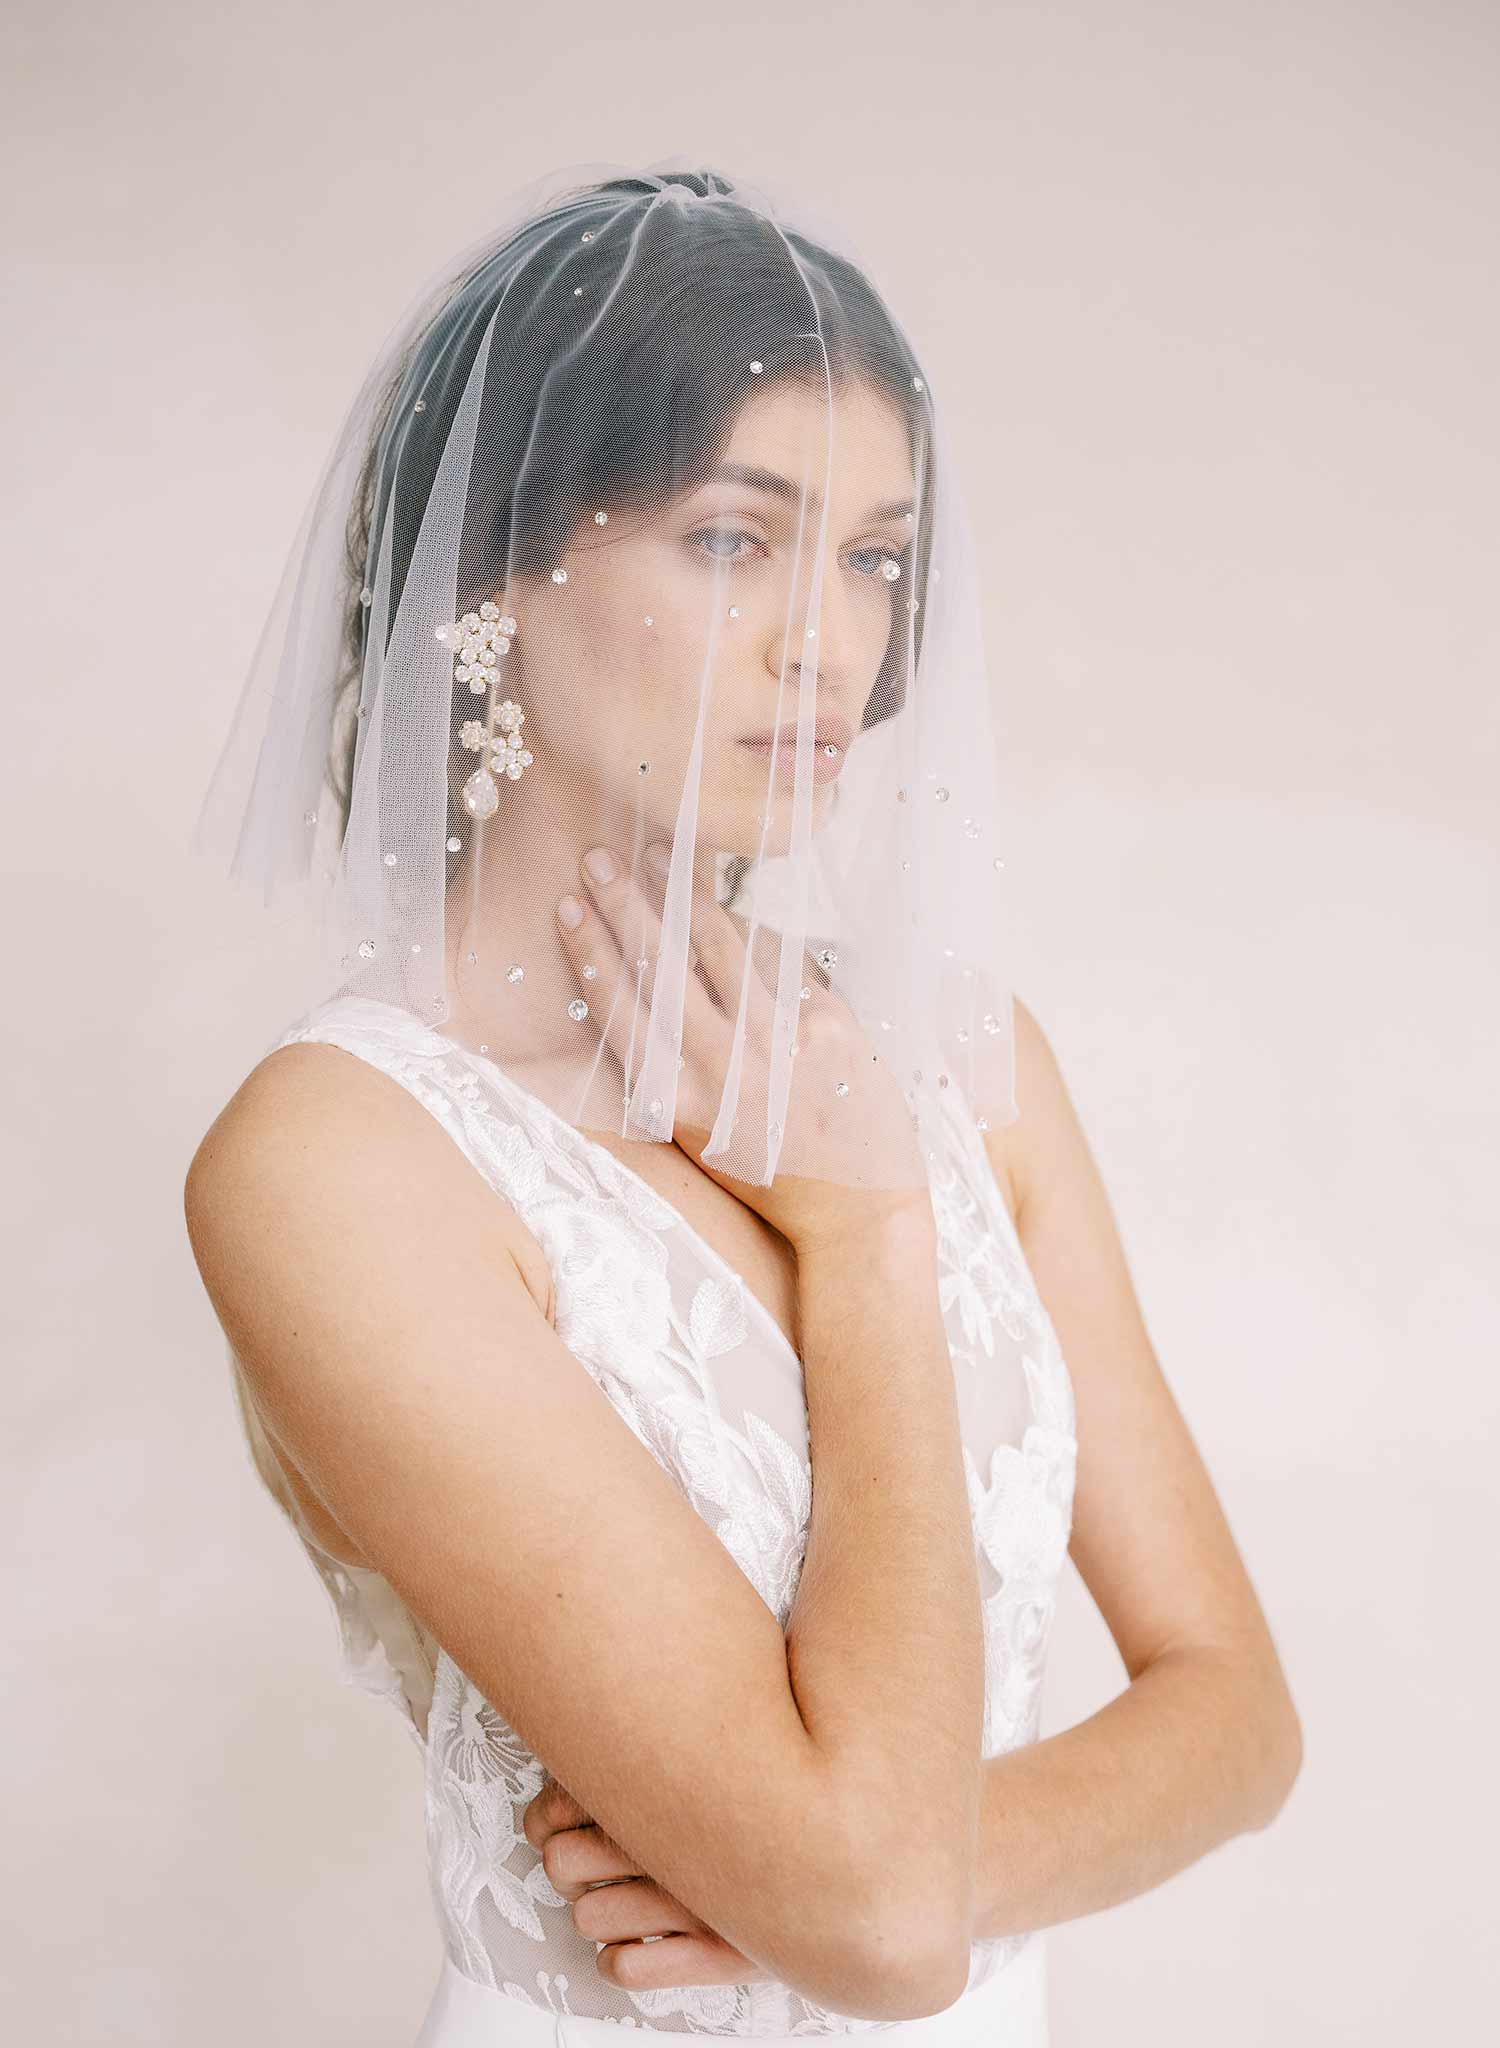 Twigs & Honey Mini Tulle Veil - Style #218 Ivory (As Pictured)